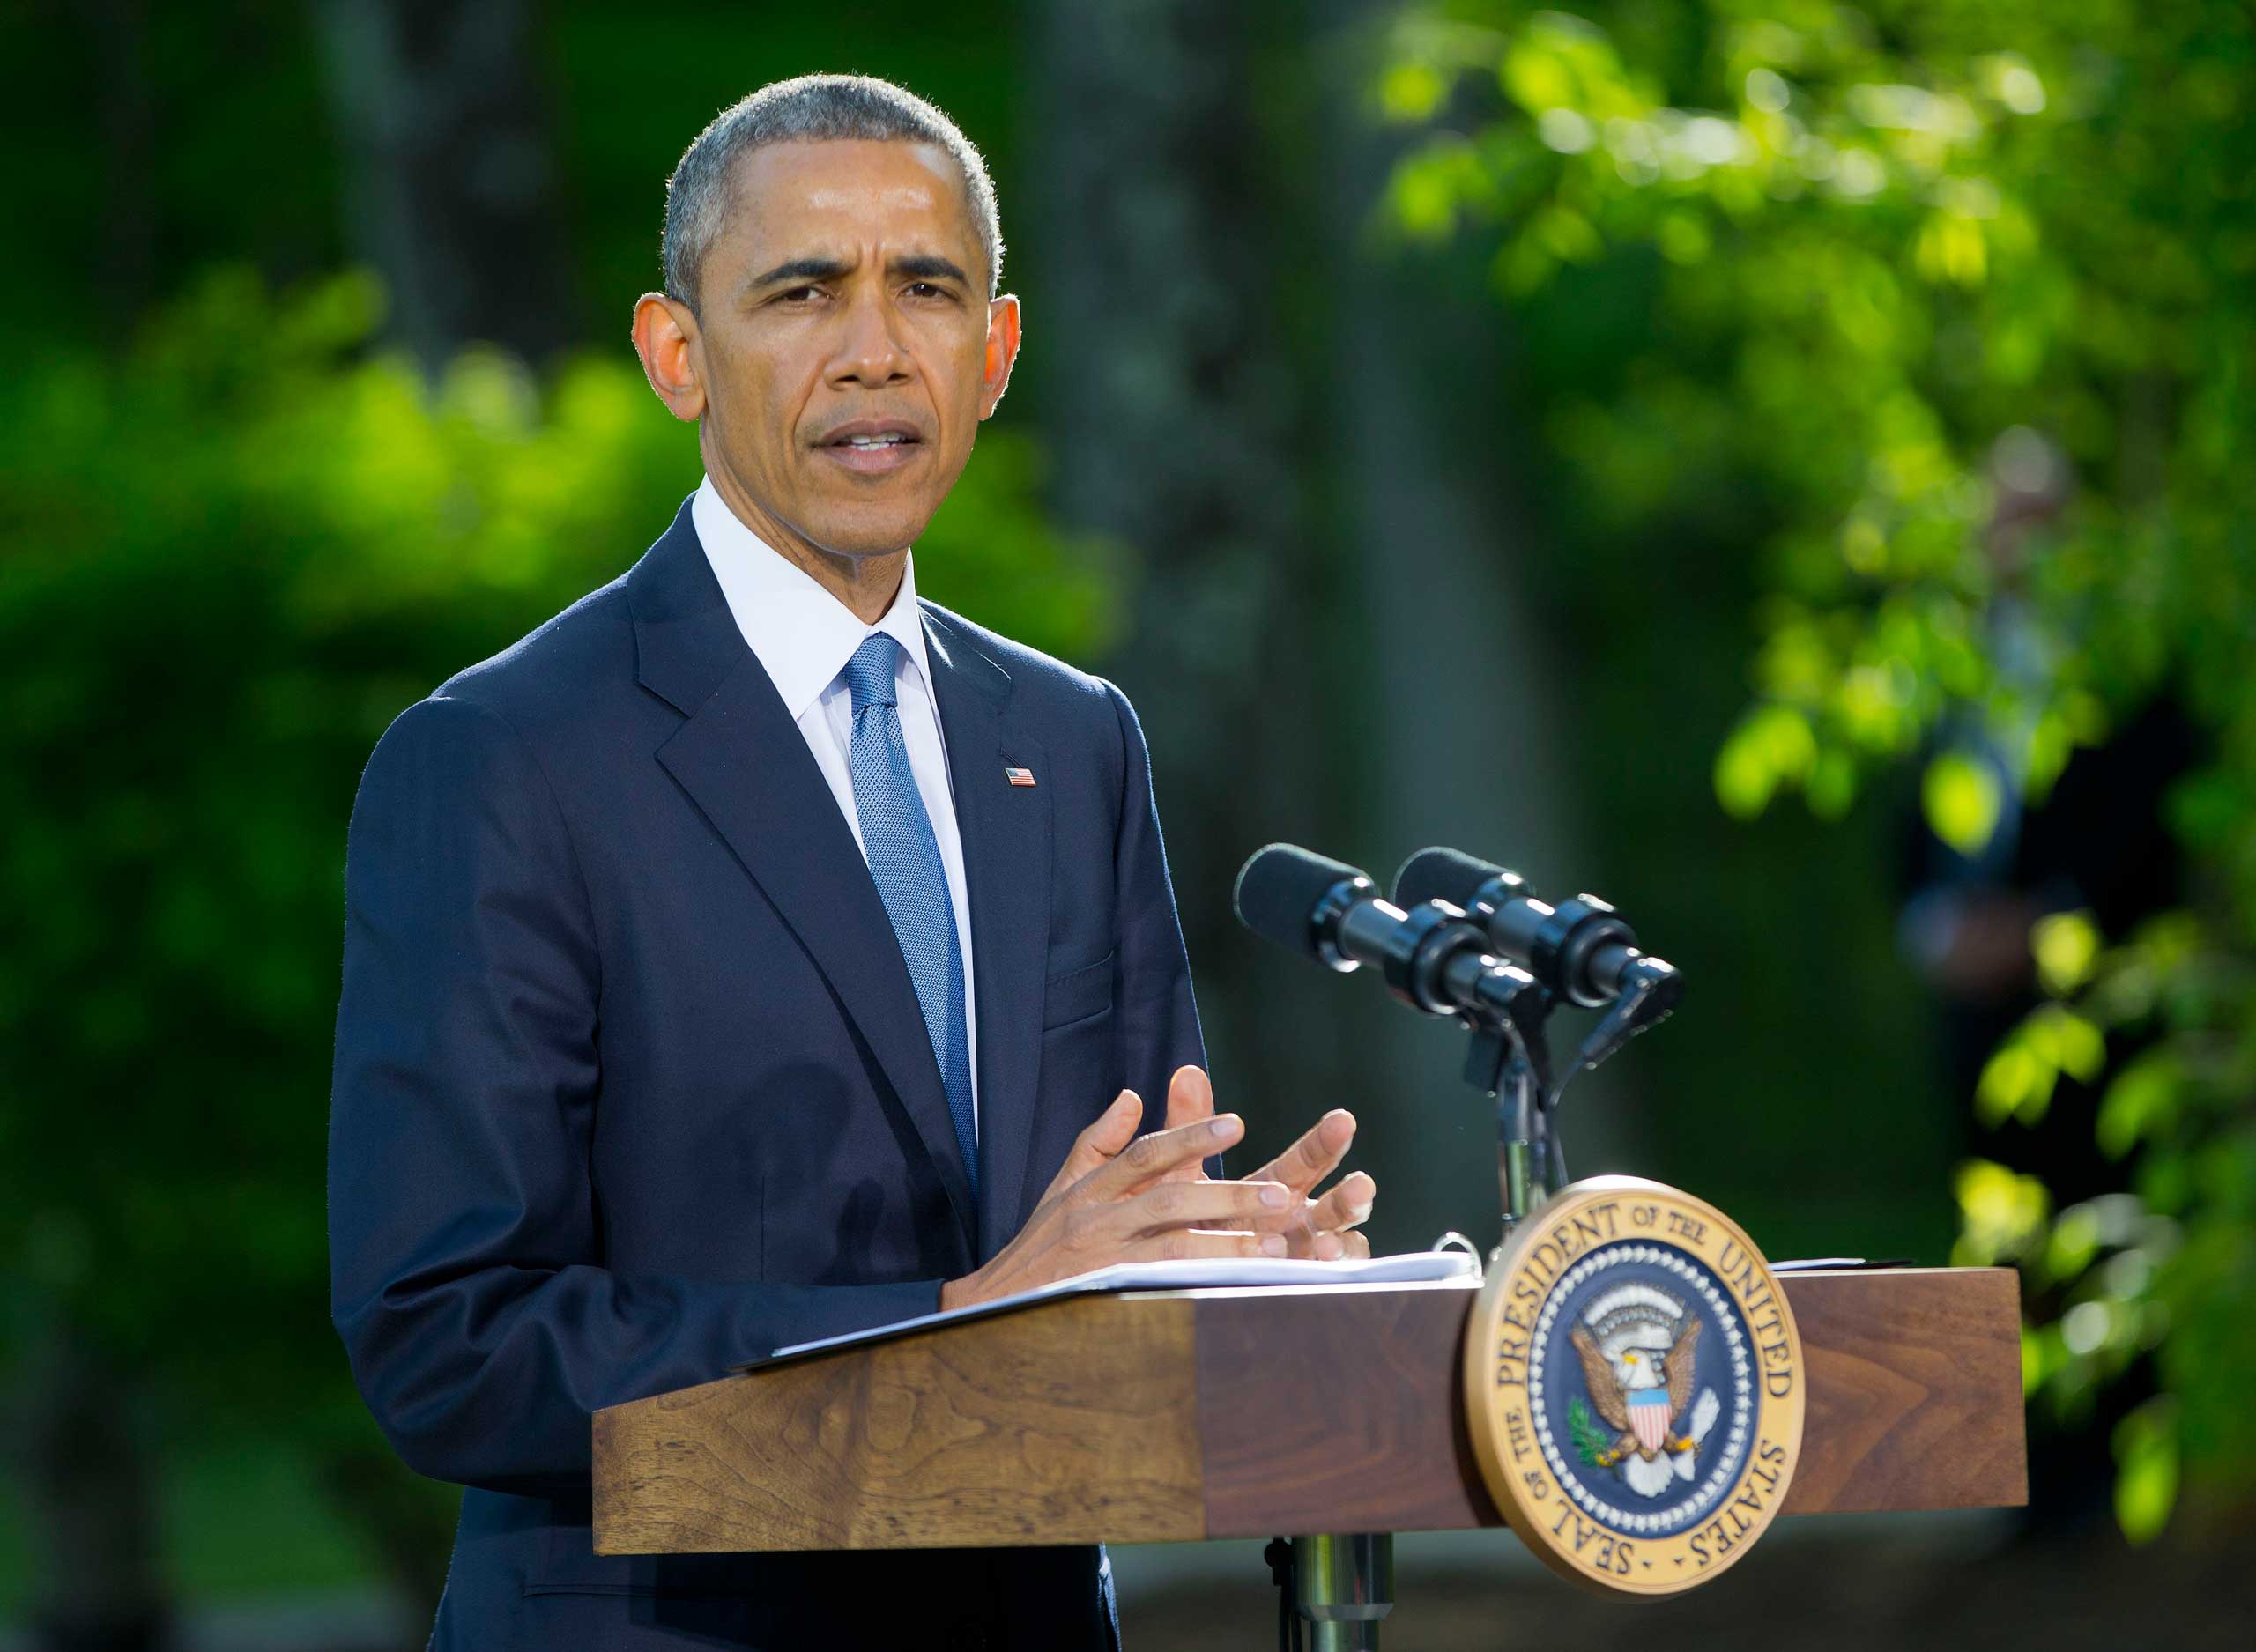 President Barack Obama speaks during a news conference after meeting with Gulf Cooperation Council leaders and delegations at Camp David in Maryland.